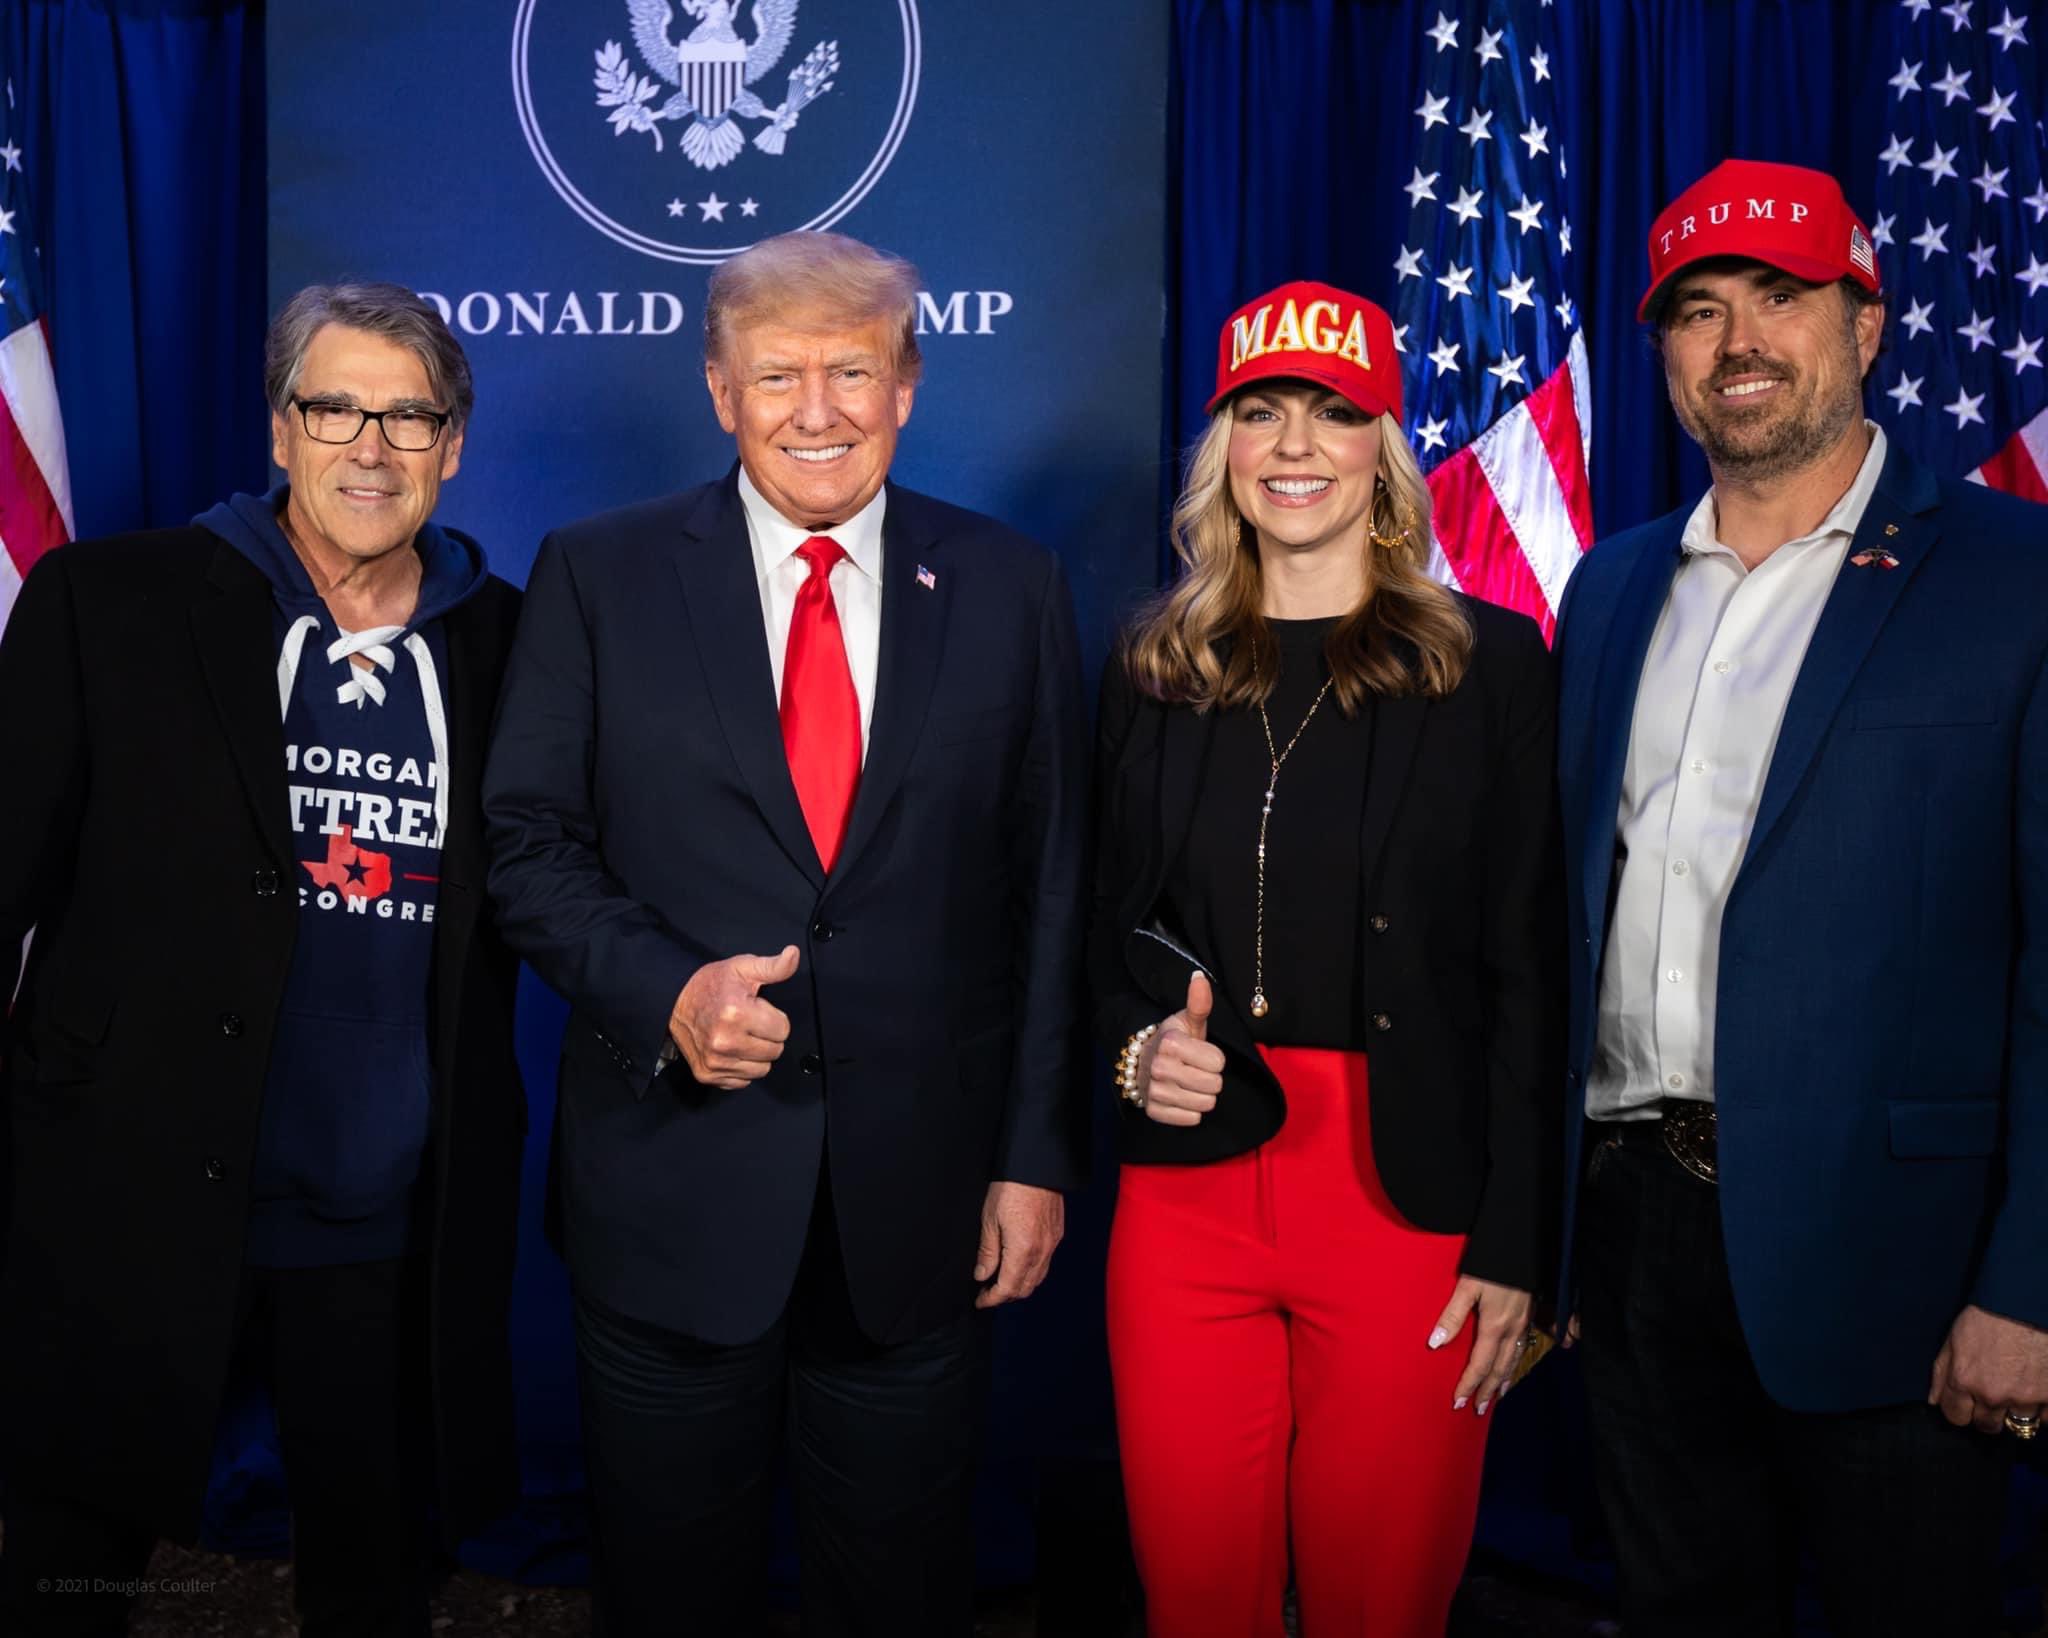 Morgan Luttrell with President Donald Trump during an event